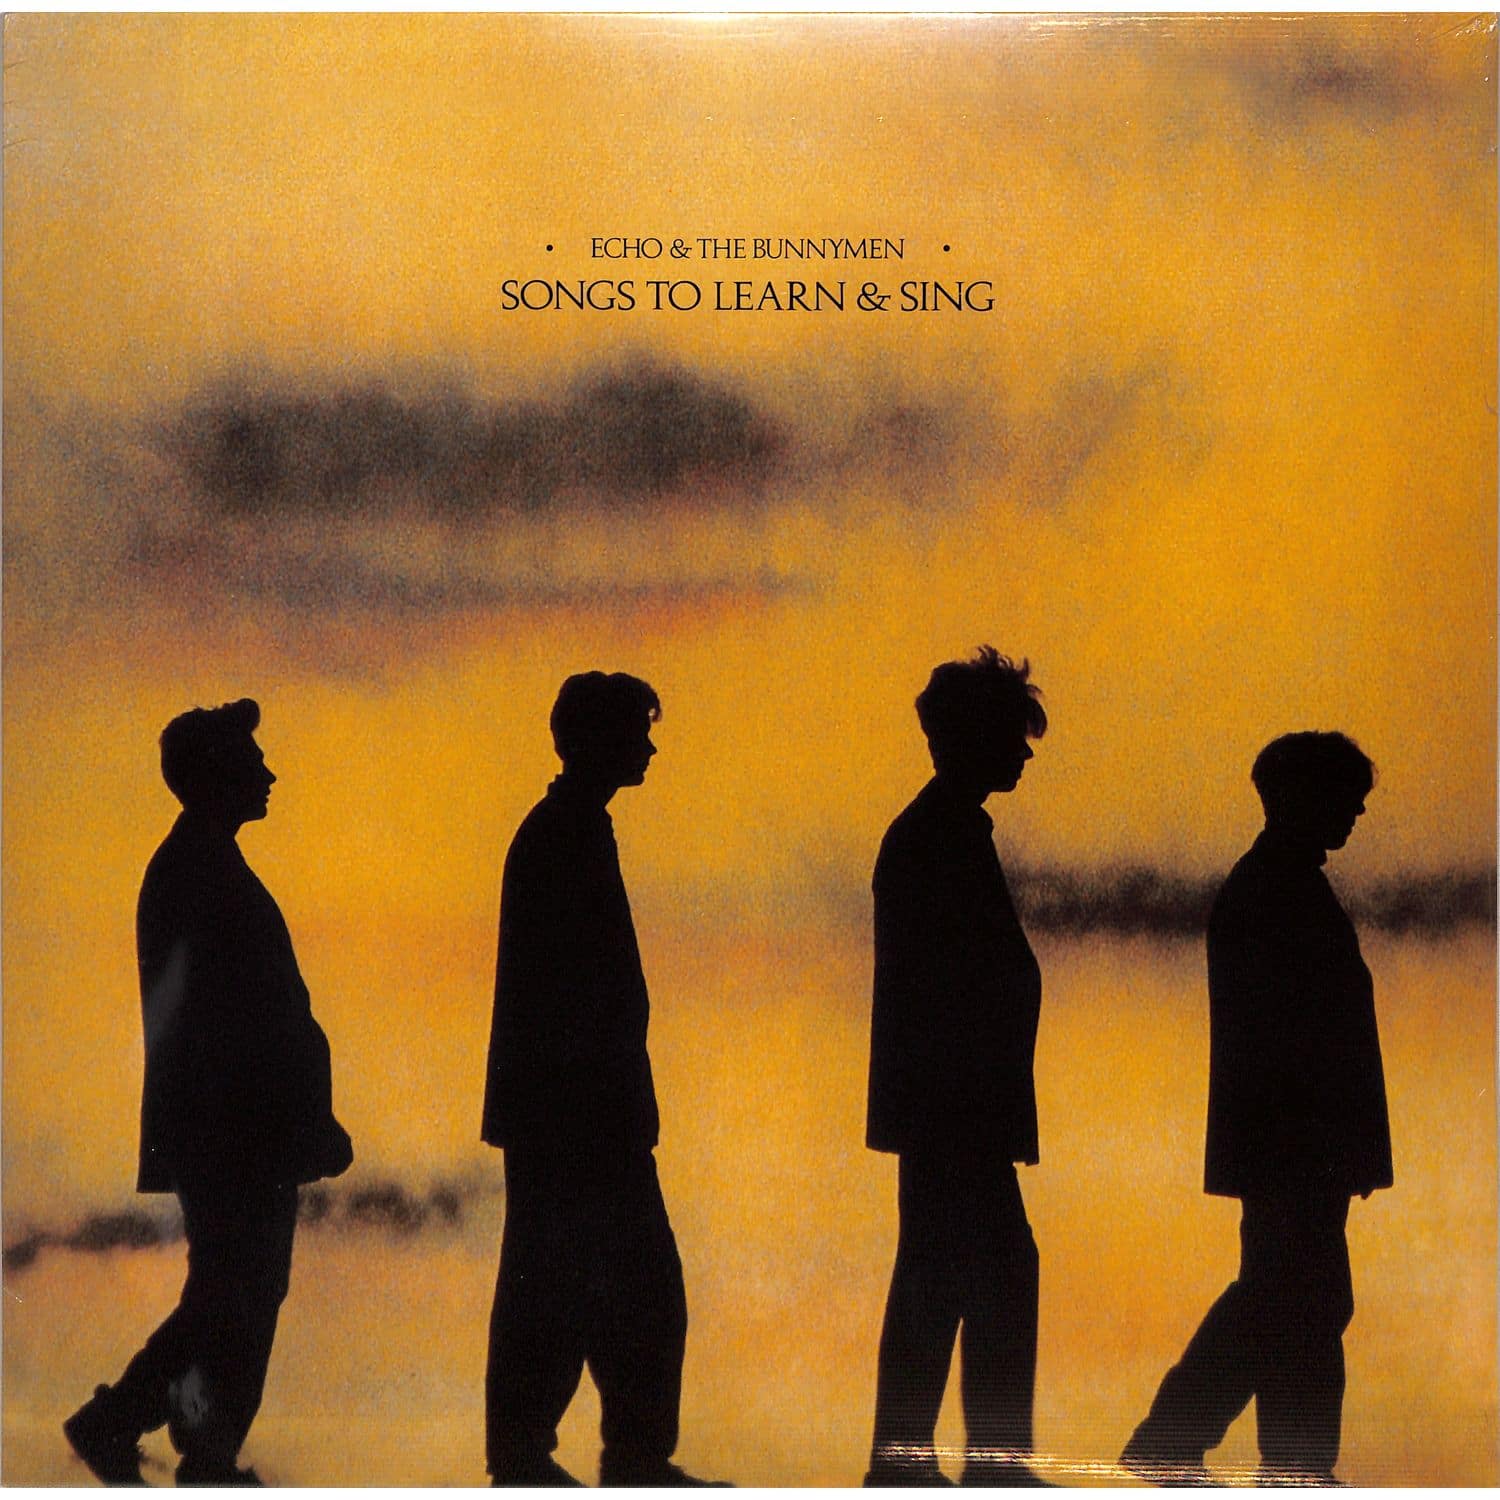 Echo And The Bunnymen - SONGS TO LEARN & SING 